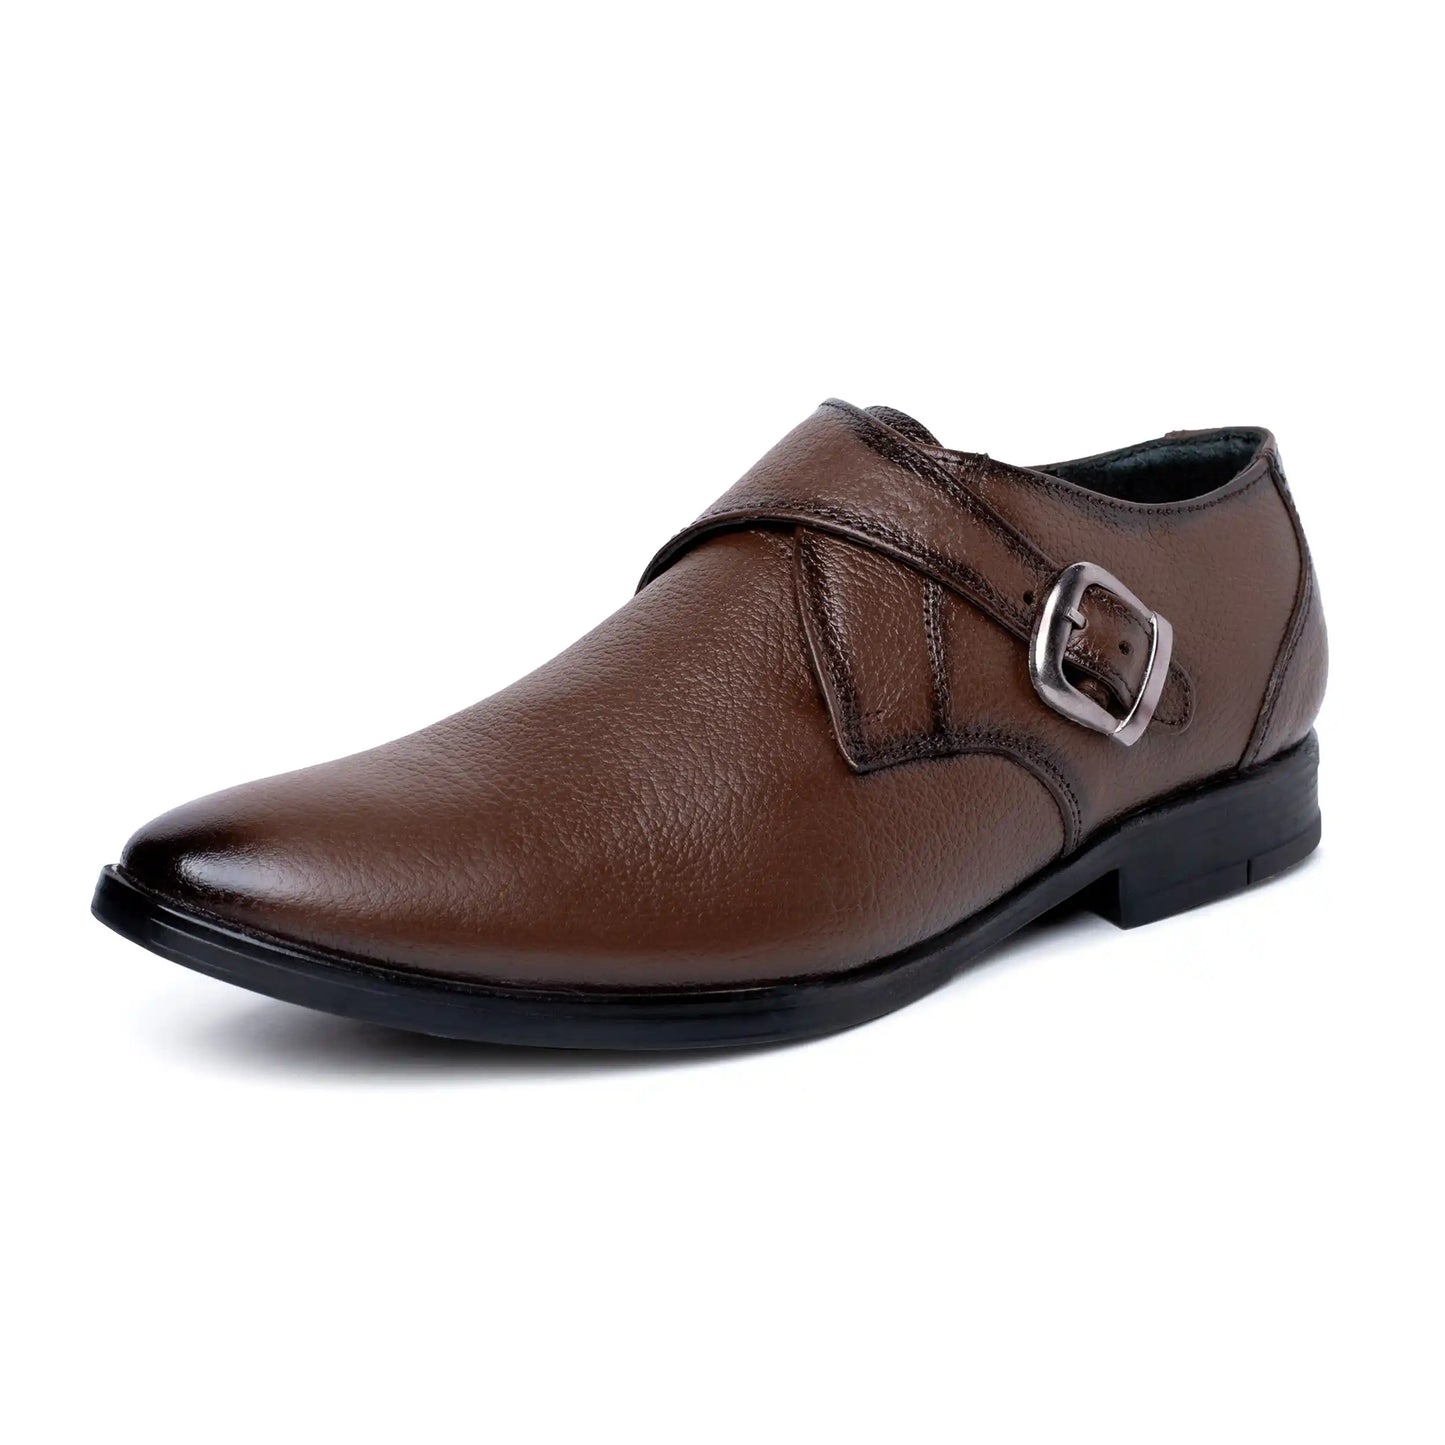 Genuine Leather Monk Strap Shoes for Men